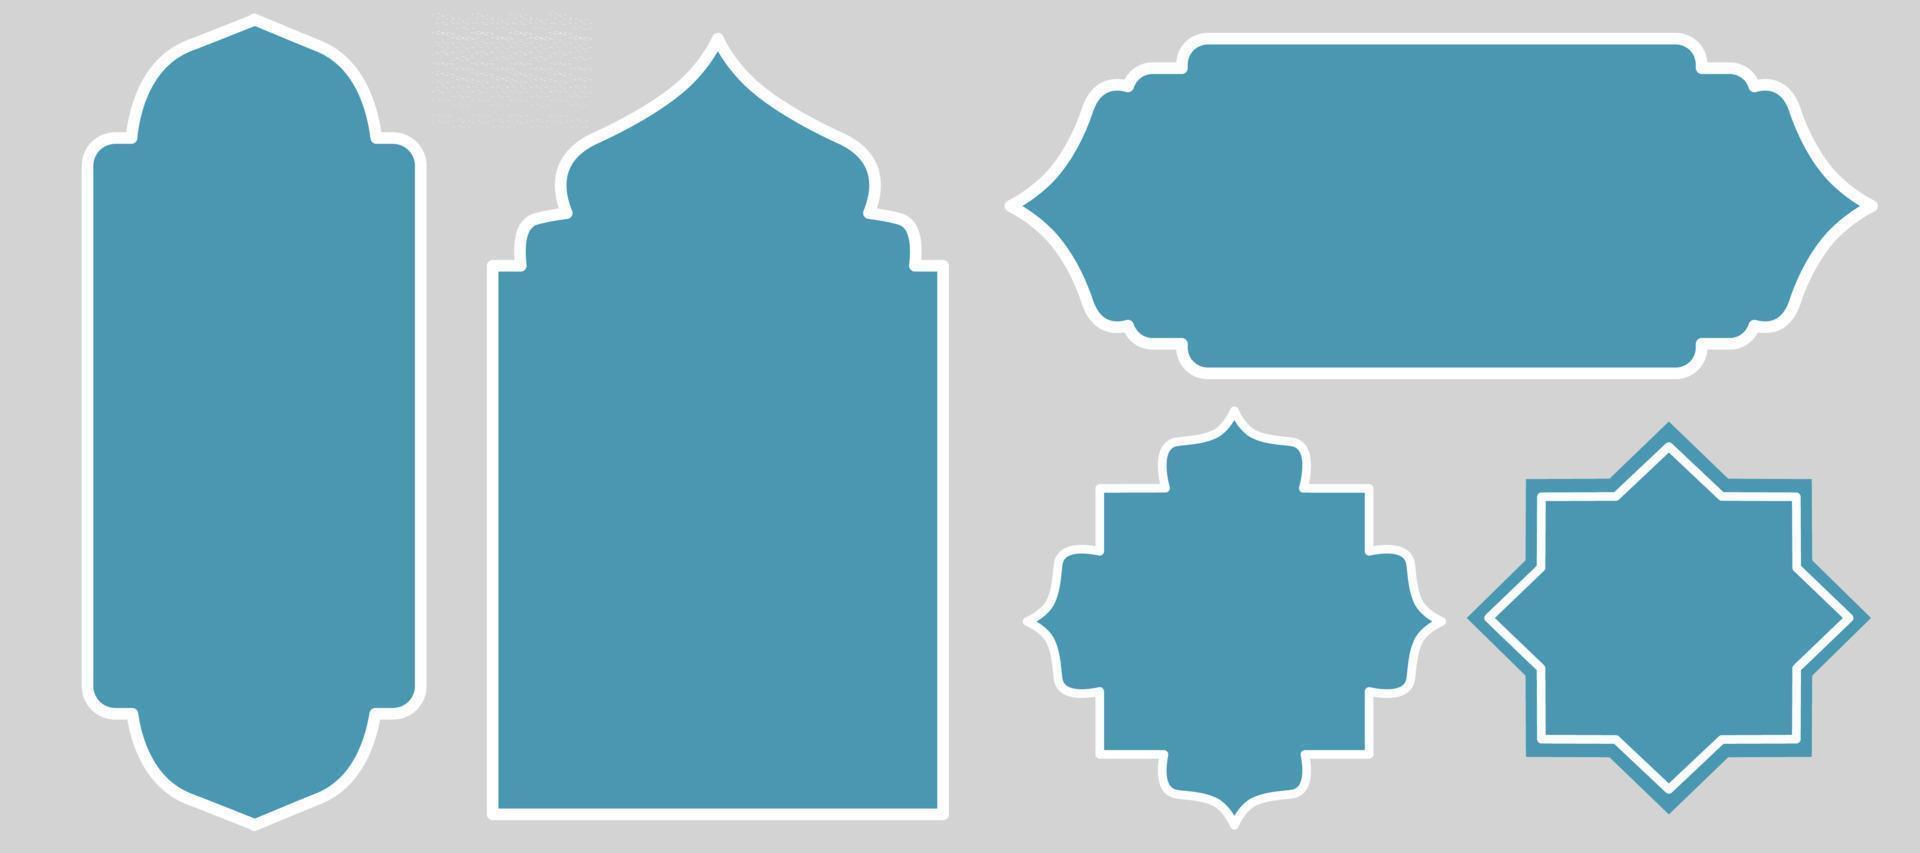 Set of Islamic Shapes for Frame Background vector